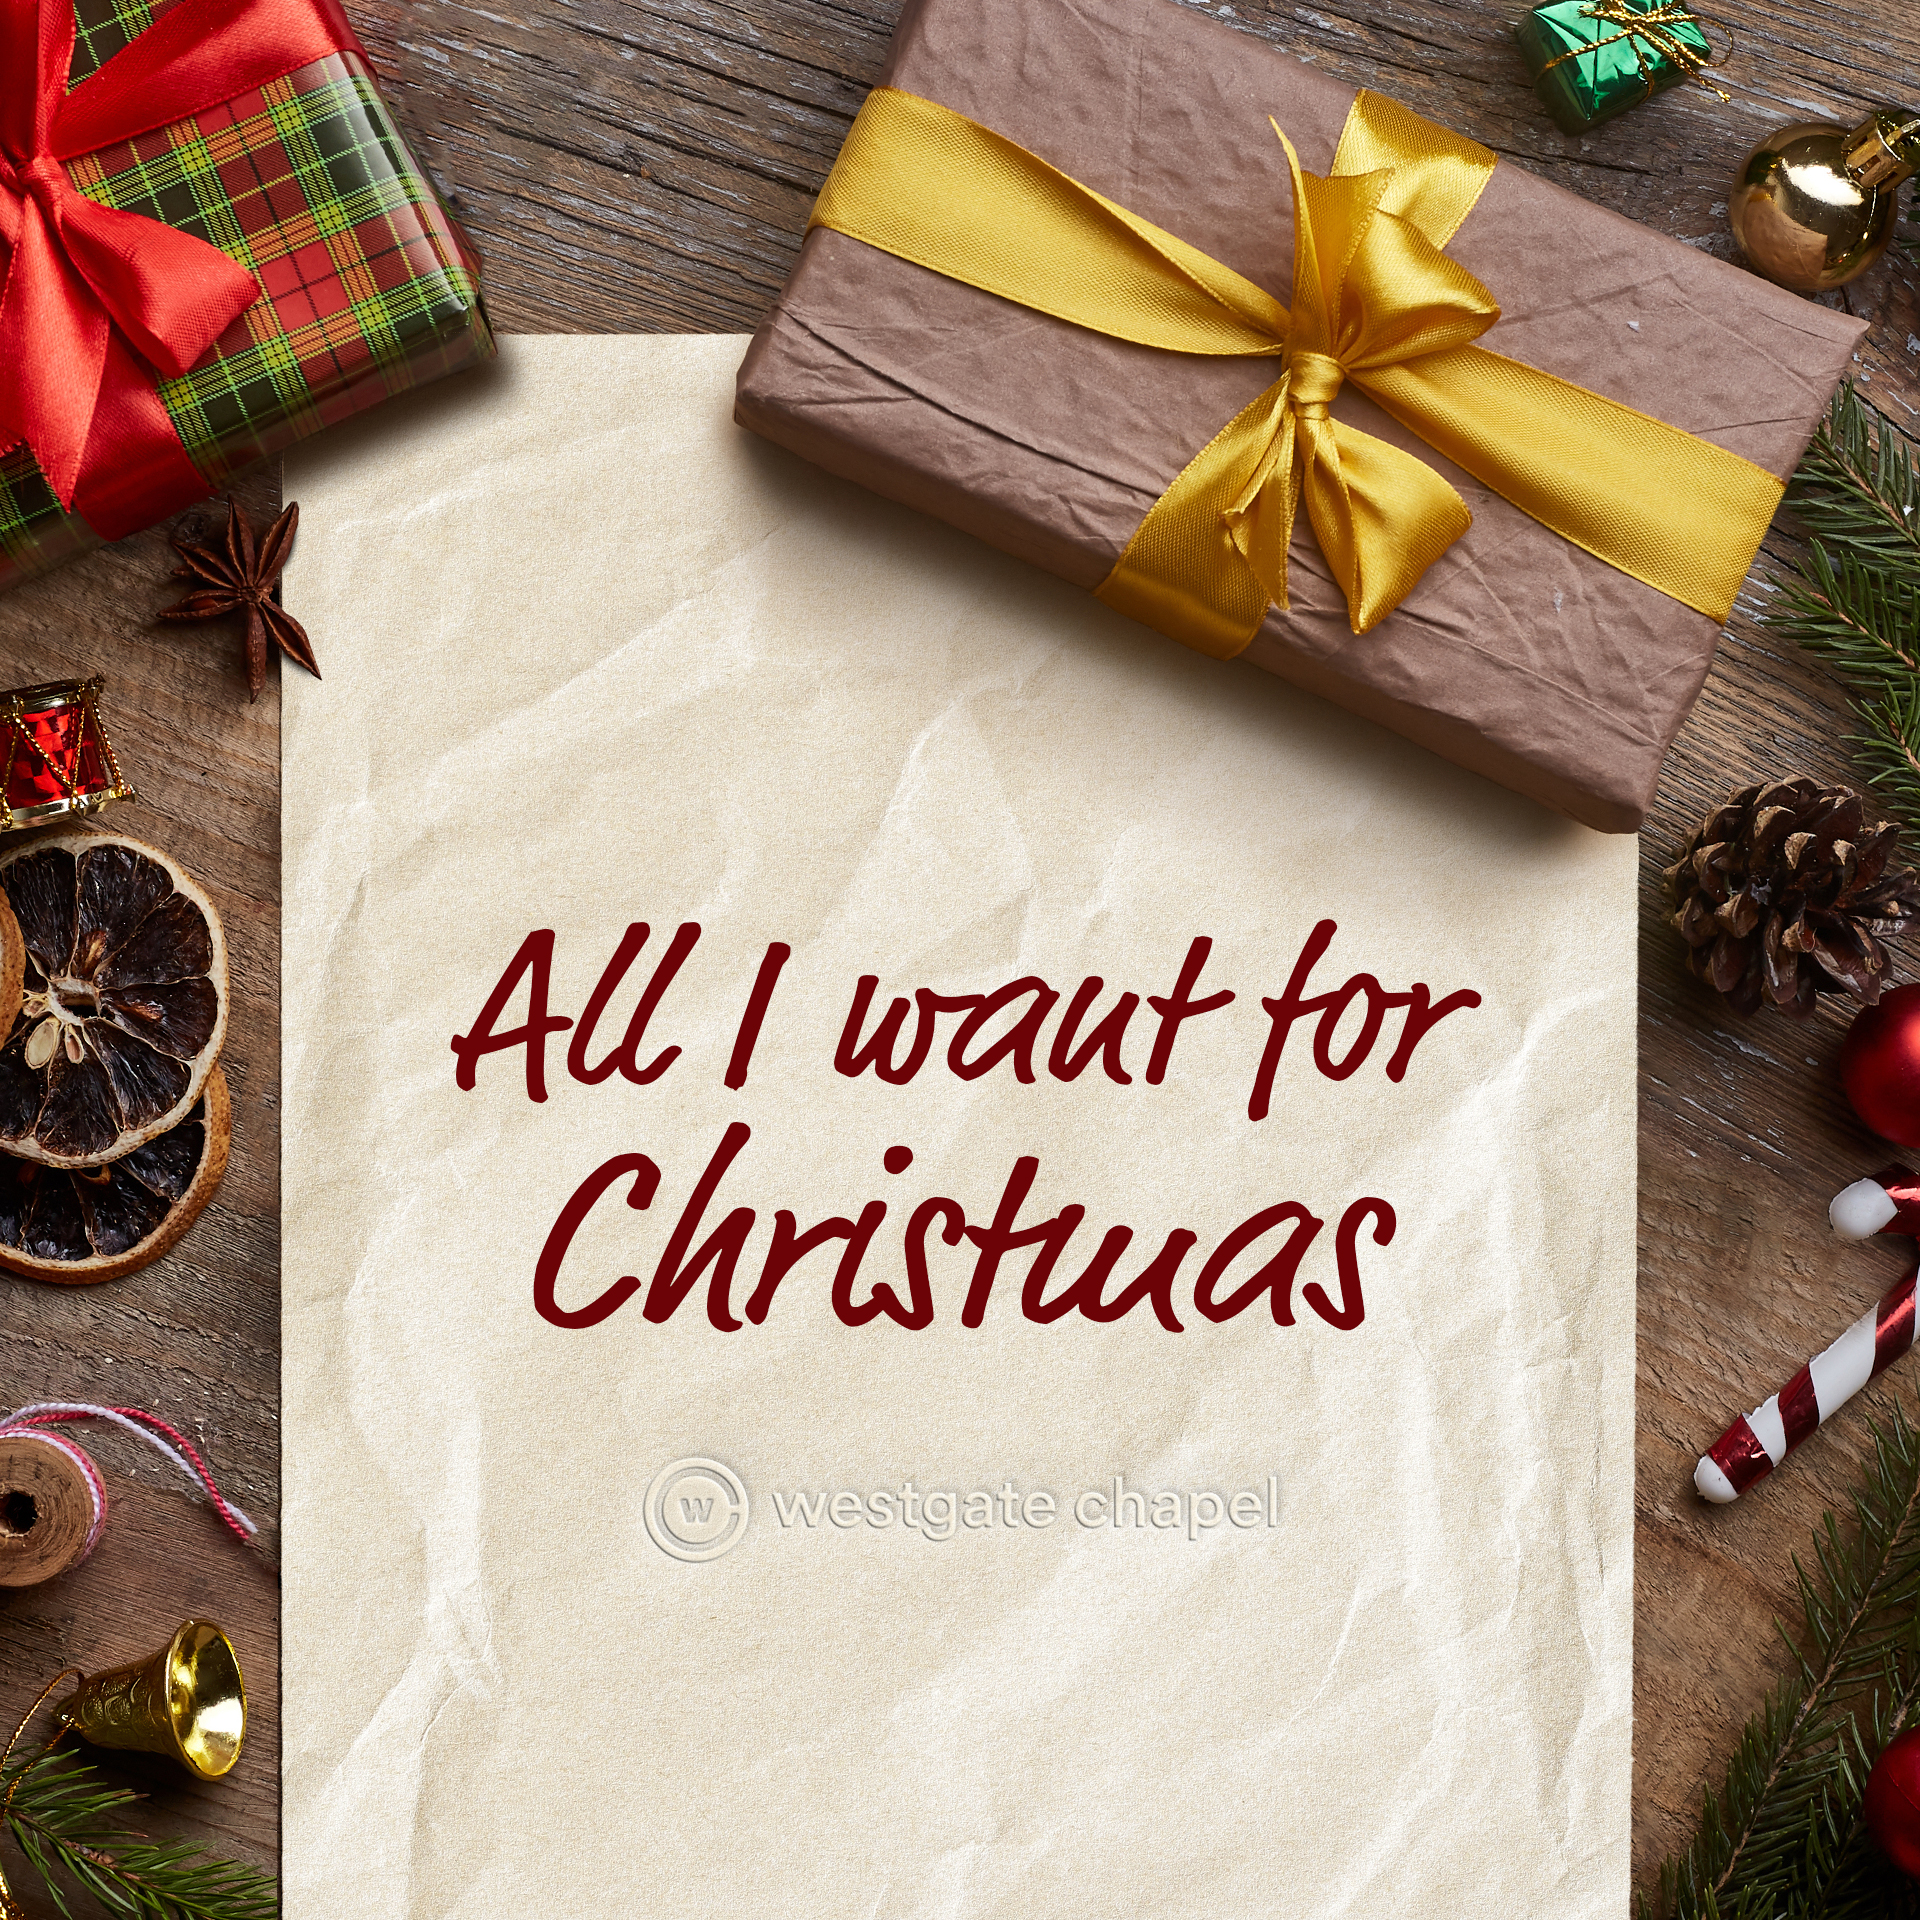 All I Want For Christmas - The Search For Security